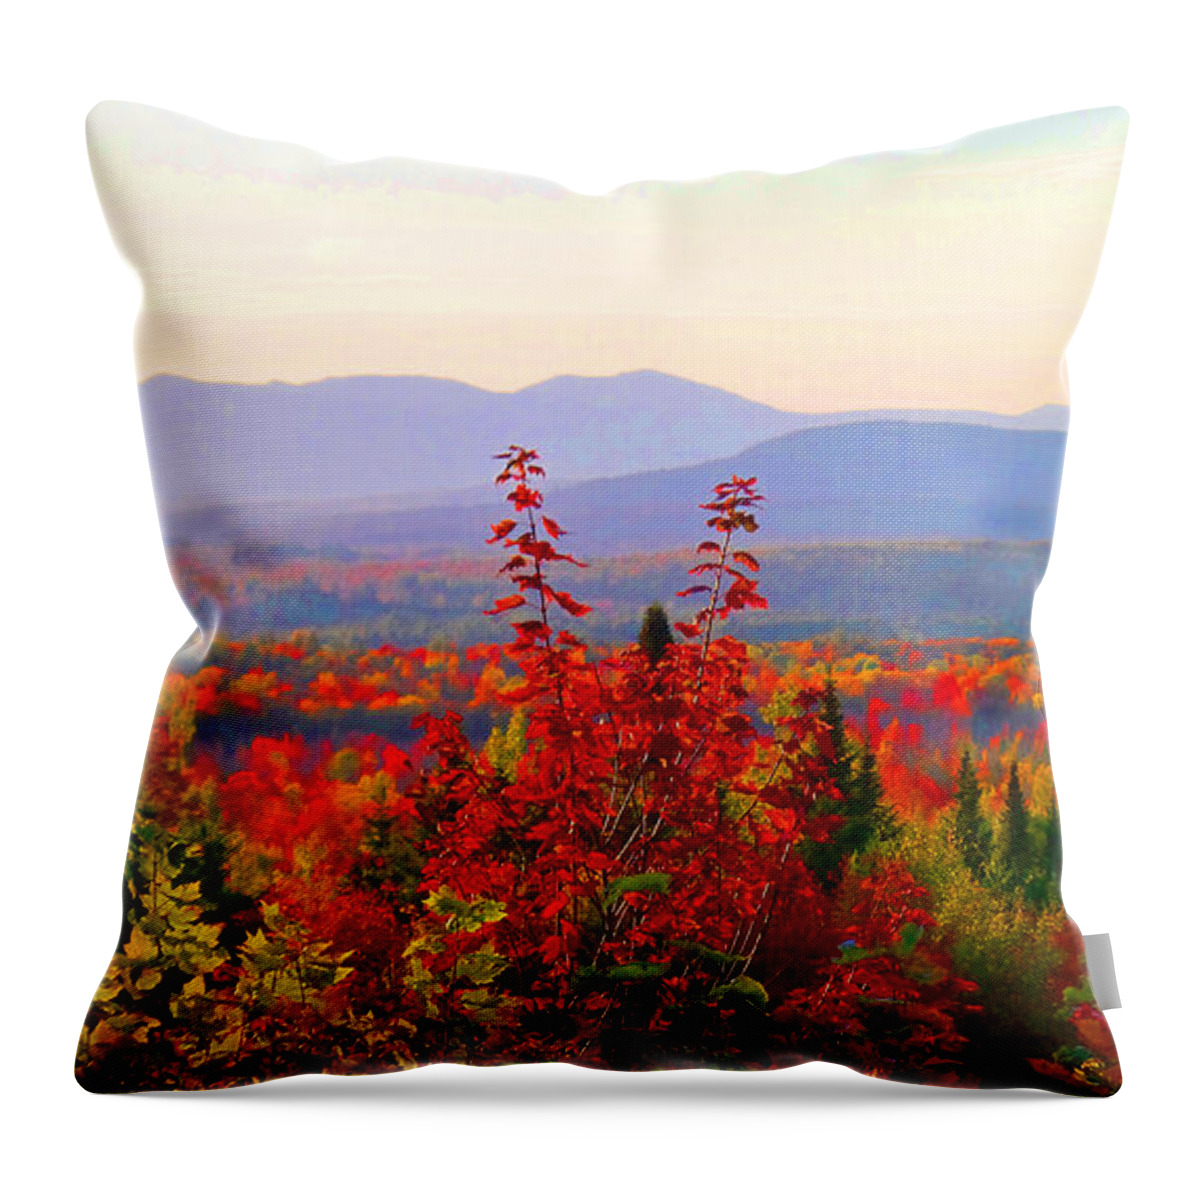 Autumn Throw Pillow featuring the photograph National Scenic Byway by Mike Breau